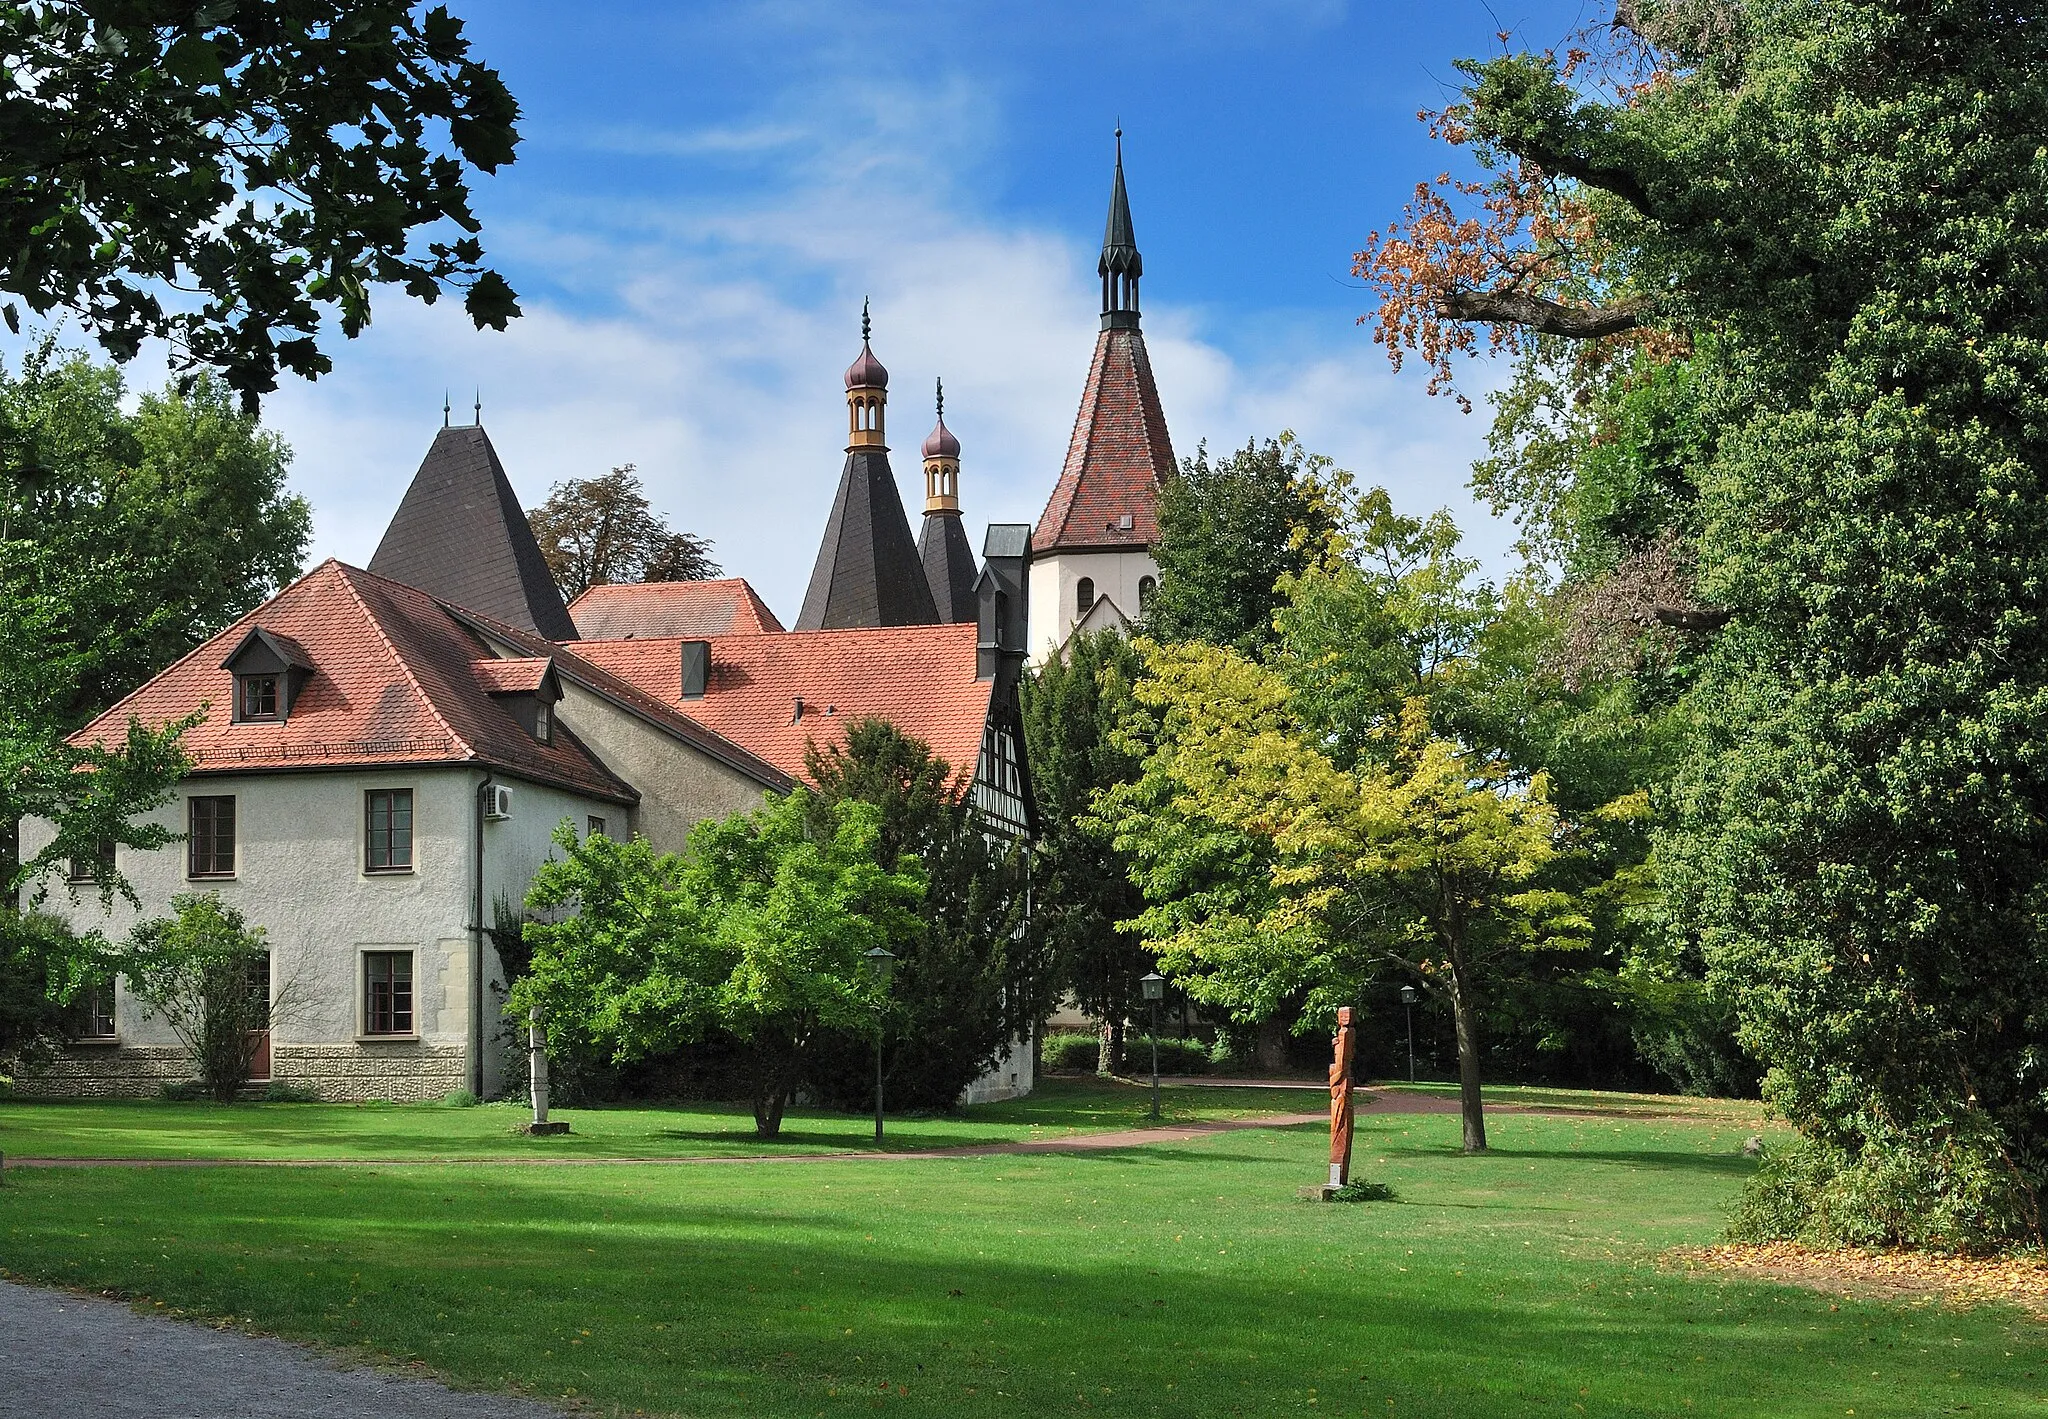 Photo showing: The castle garden in Hemmingen in the German Federal State Baden-Württemberg. In the background is seen the castle Hemmingen and the tower of the protestant Saint Lawrence Church.